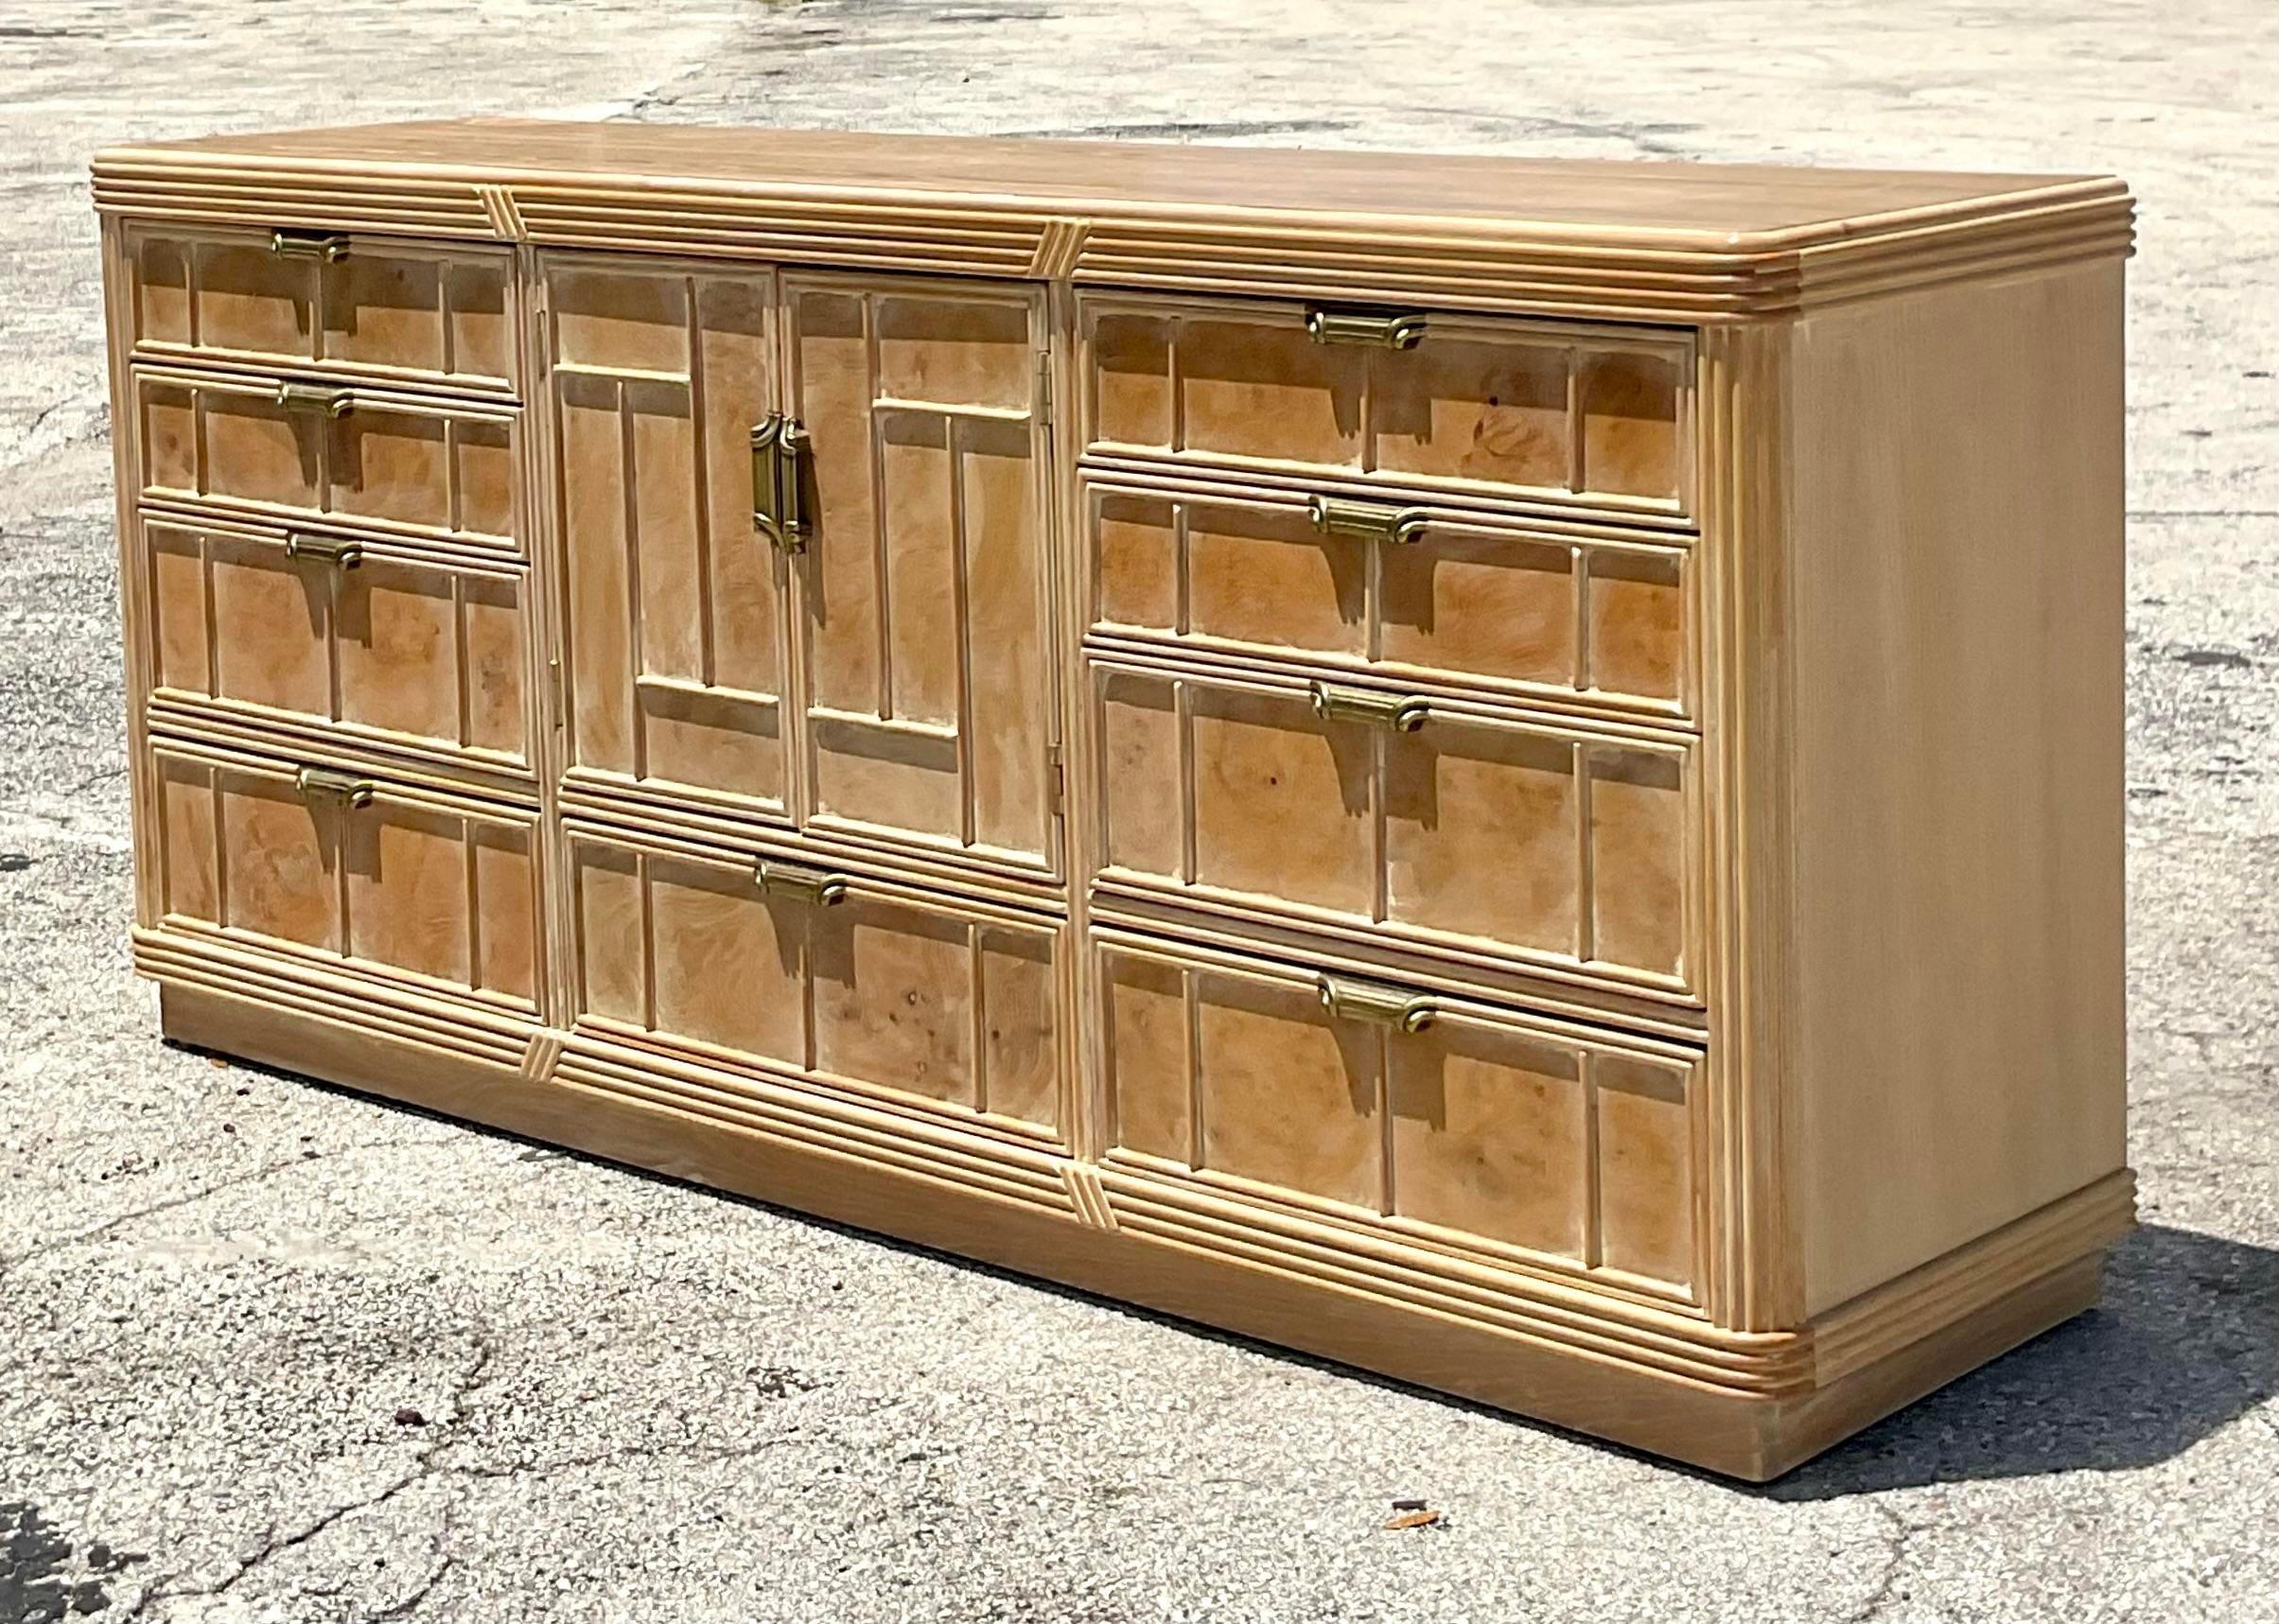 A gorgeous vintage Coastal credenza. A chic cerused Burl wood with a great patina from time. The center door opens to reveal these additional drawers for storage. Acquired from a Delray estate.